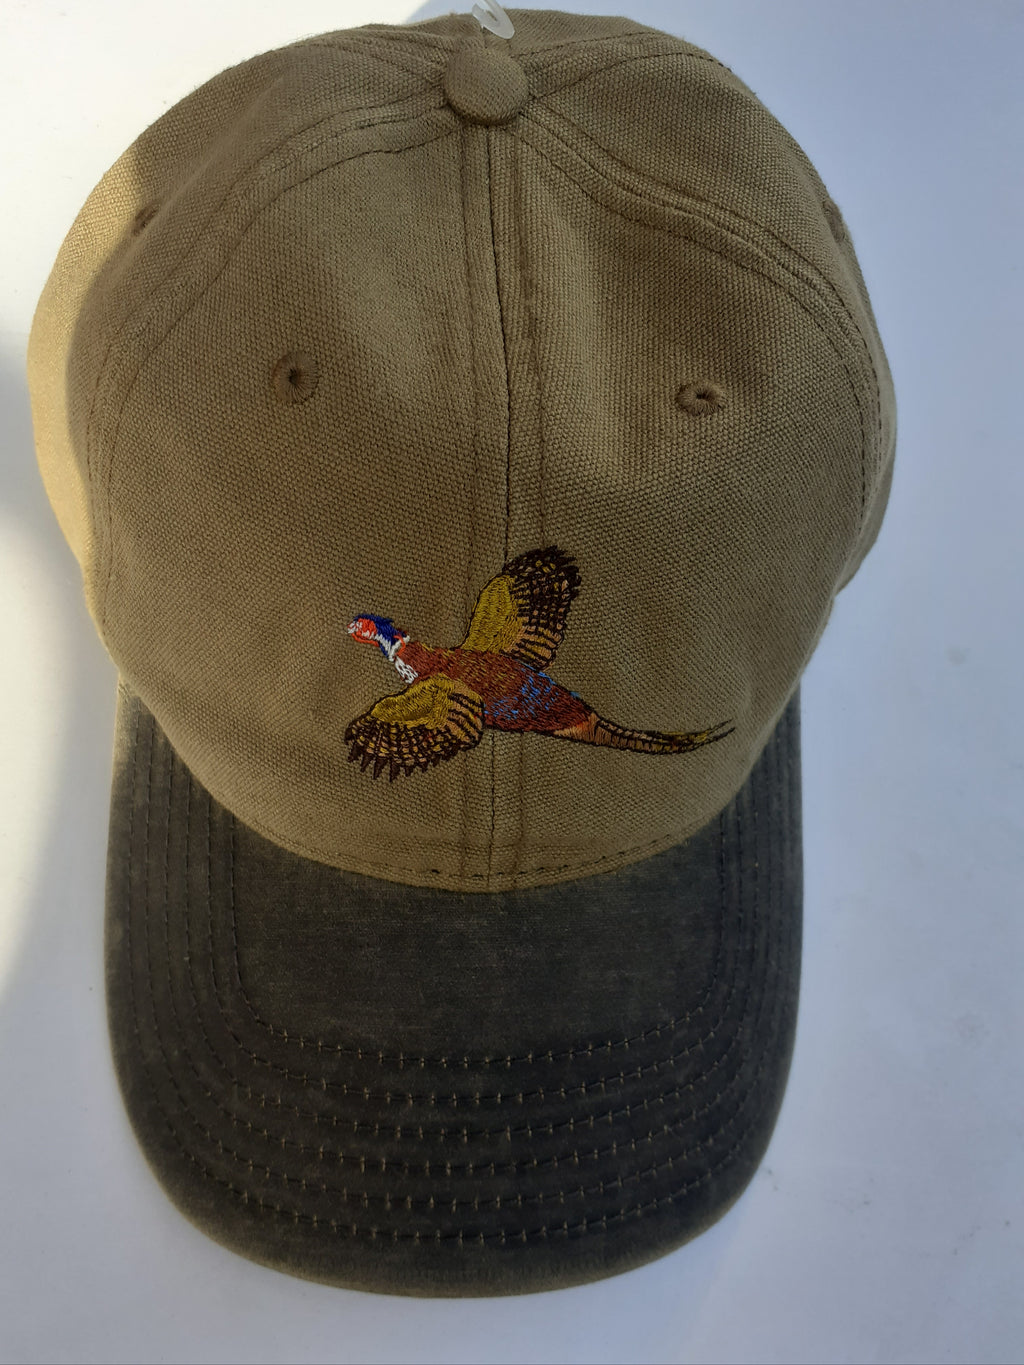 Otto Shooting Baseball Cap with Embroidered Pheasant Motif 